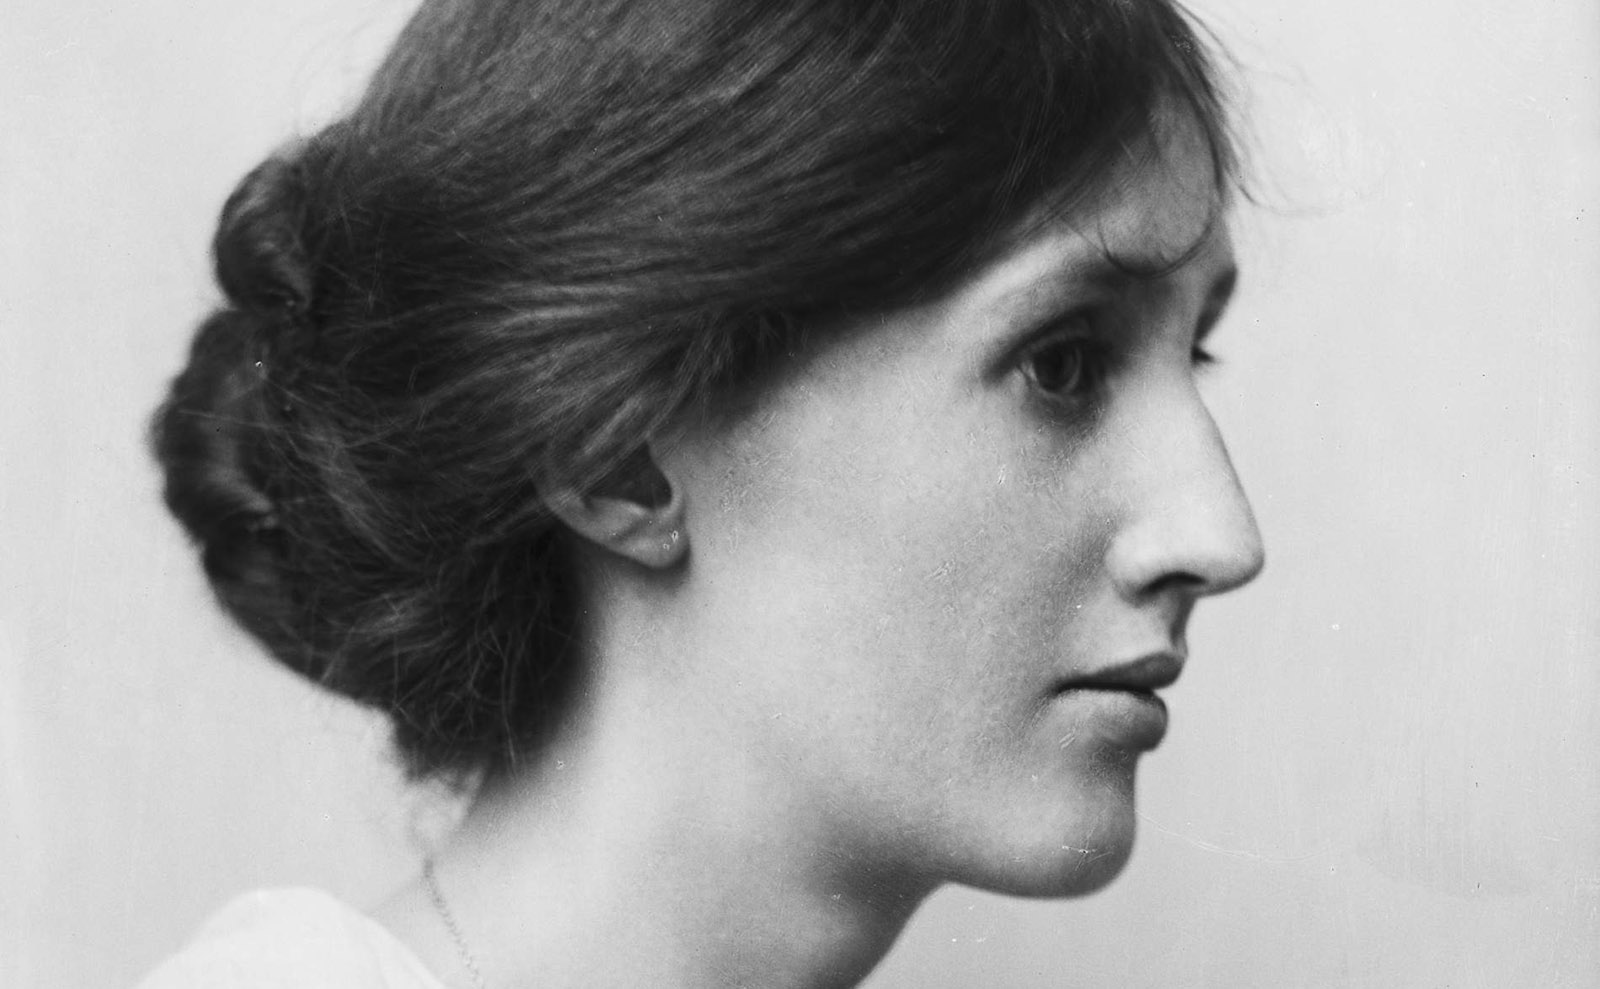 black and white photo of virginia woolf's face in profile